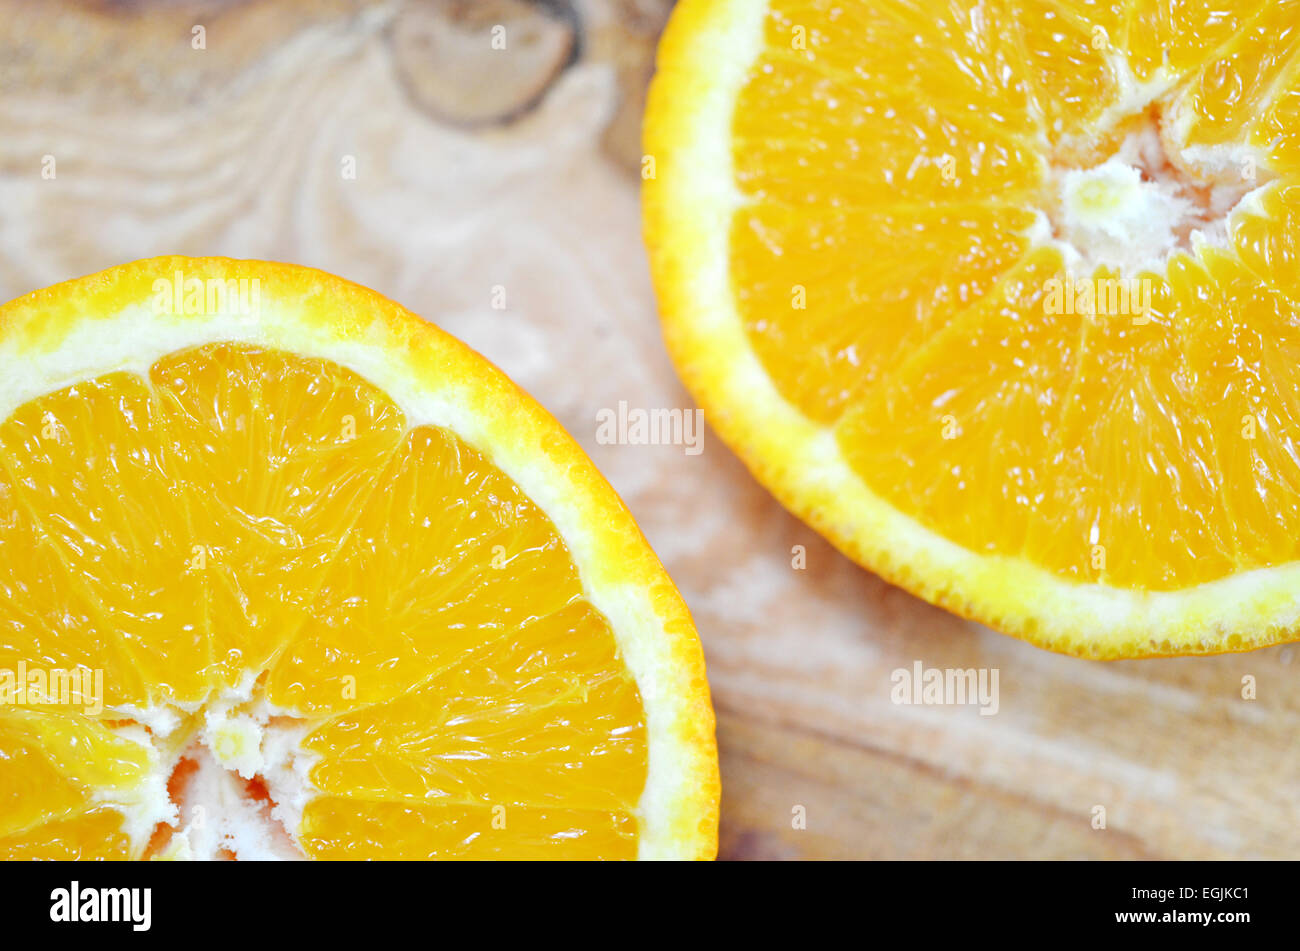 Two orange halves close up on a plank Stock Photo